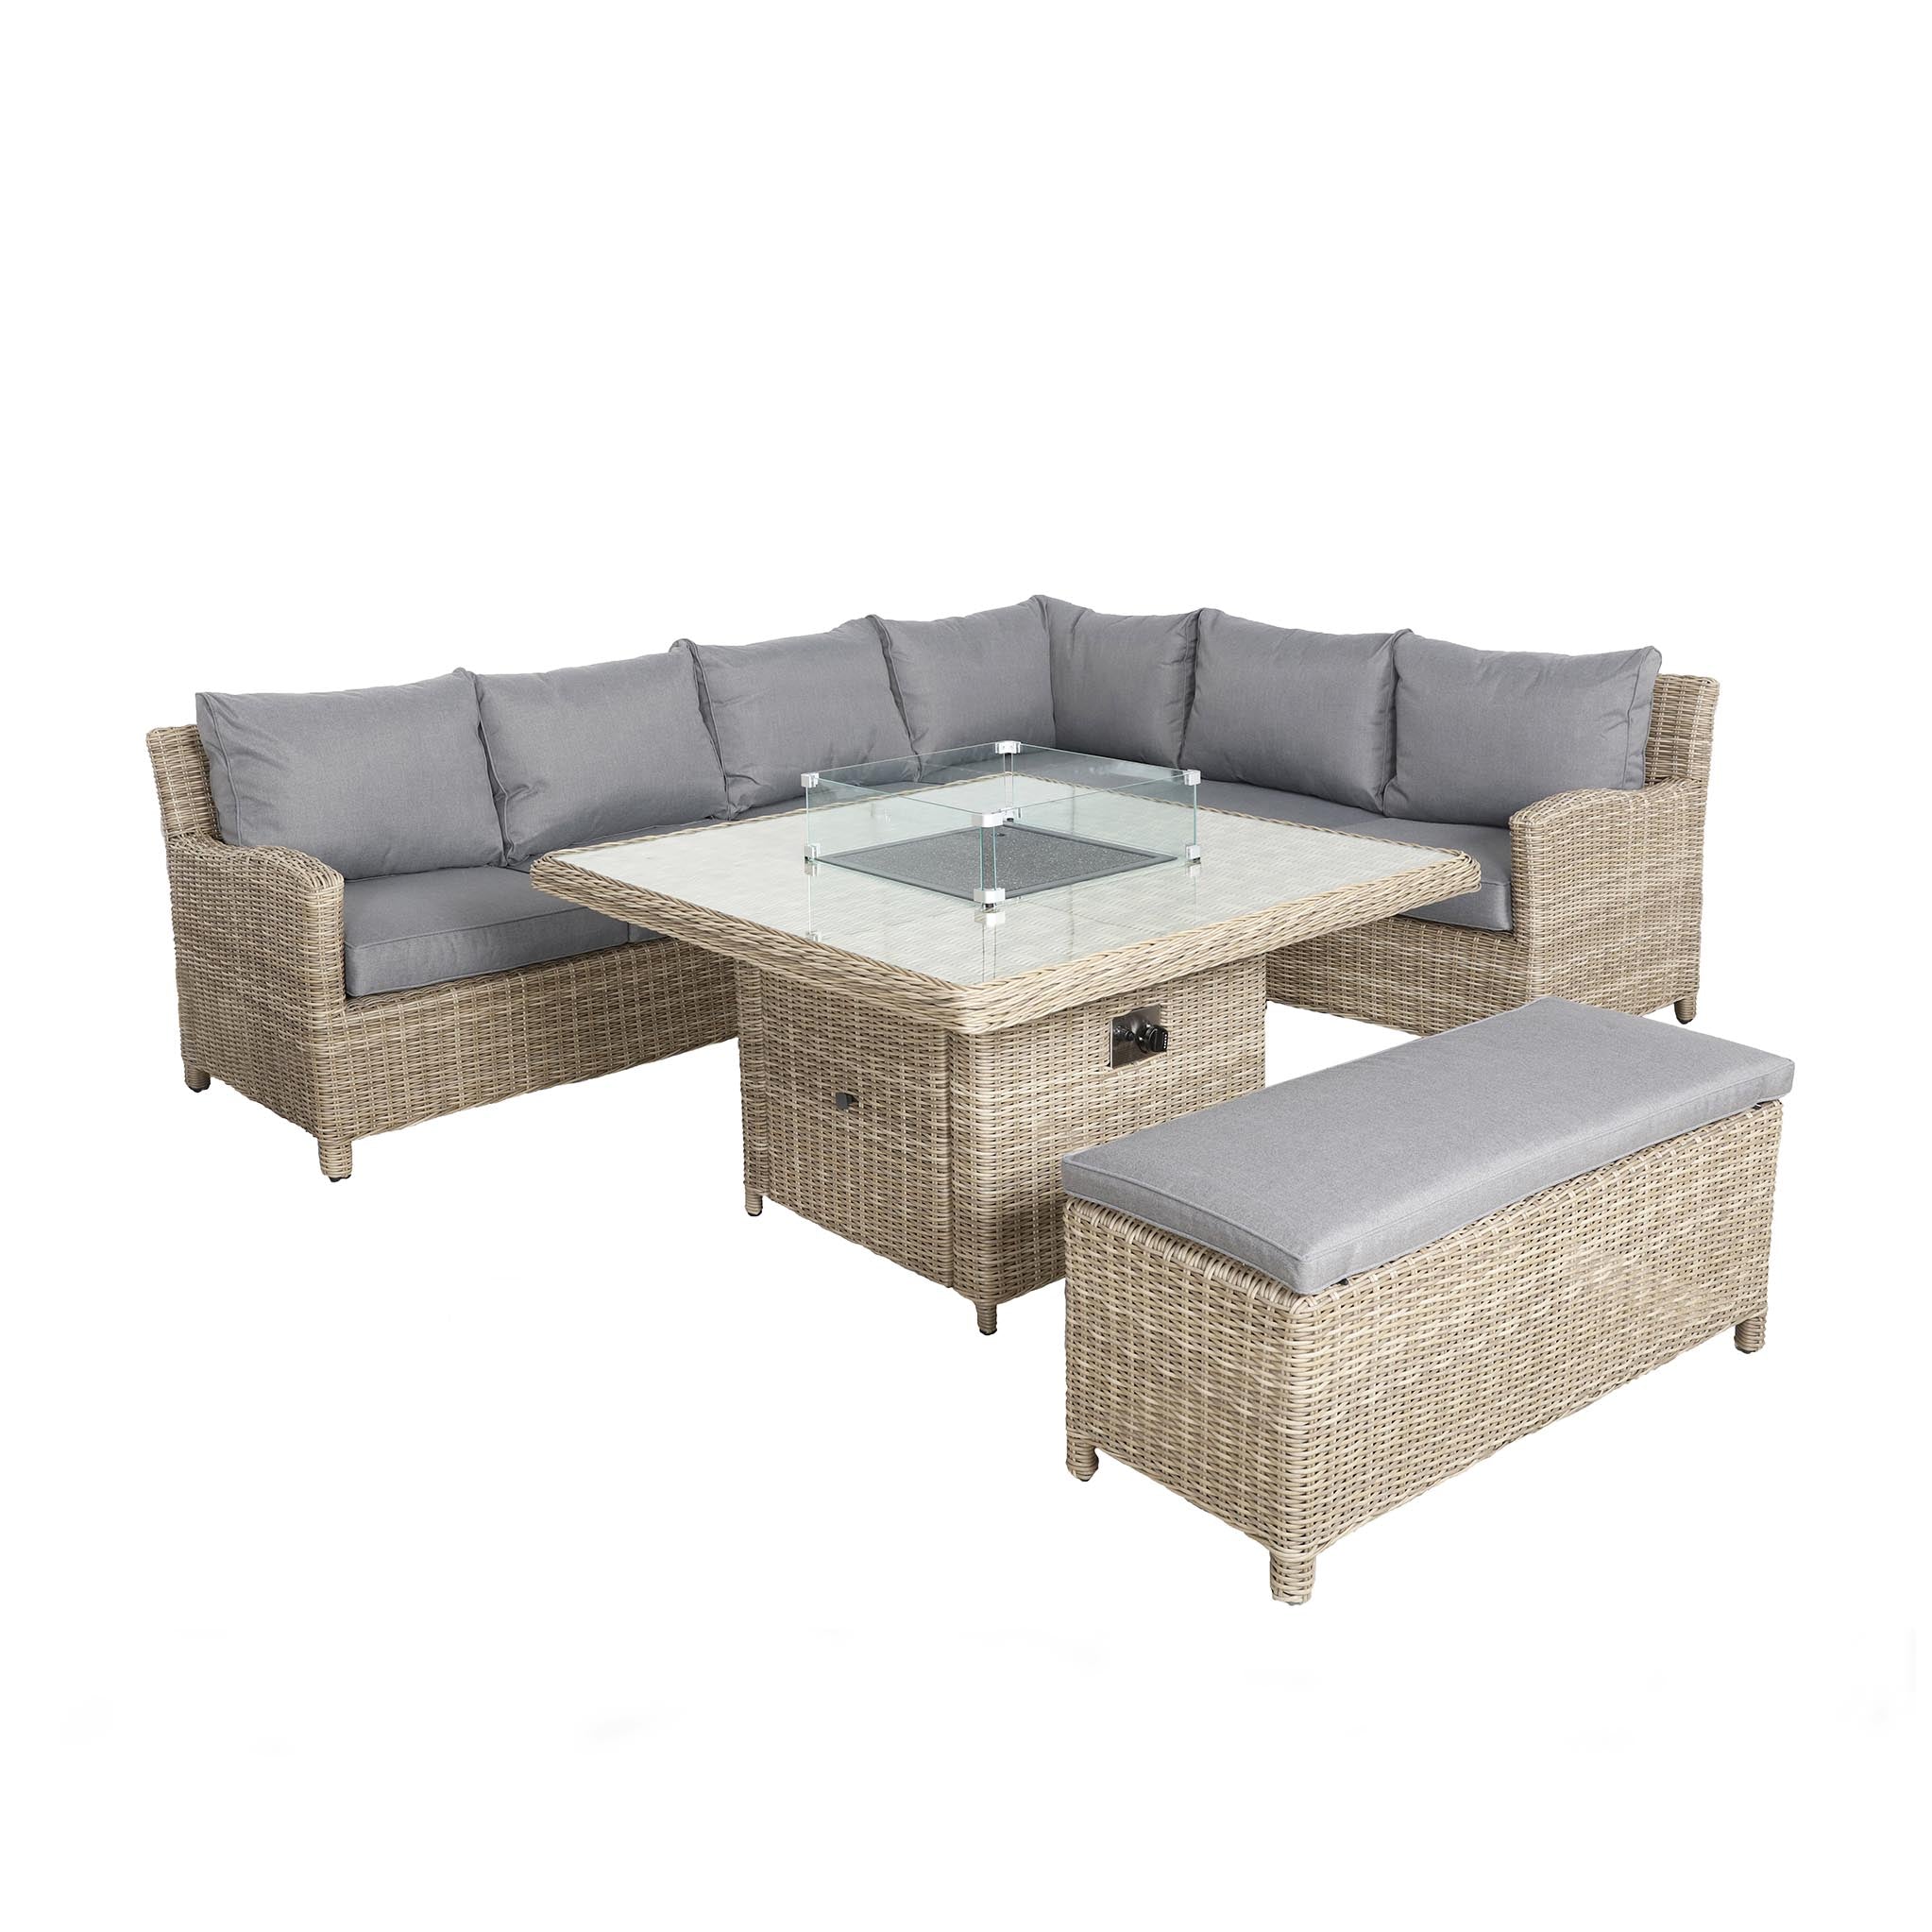 Wentworth 120cm Fire Pit Garden Dine Or Lounge Rattan Set With Bench